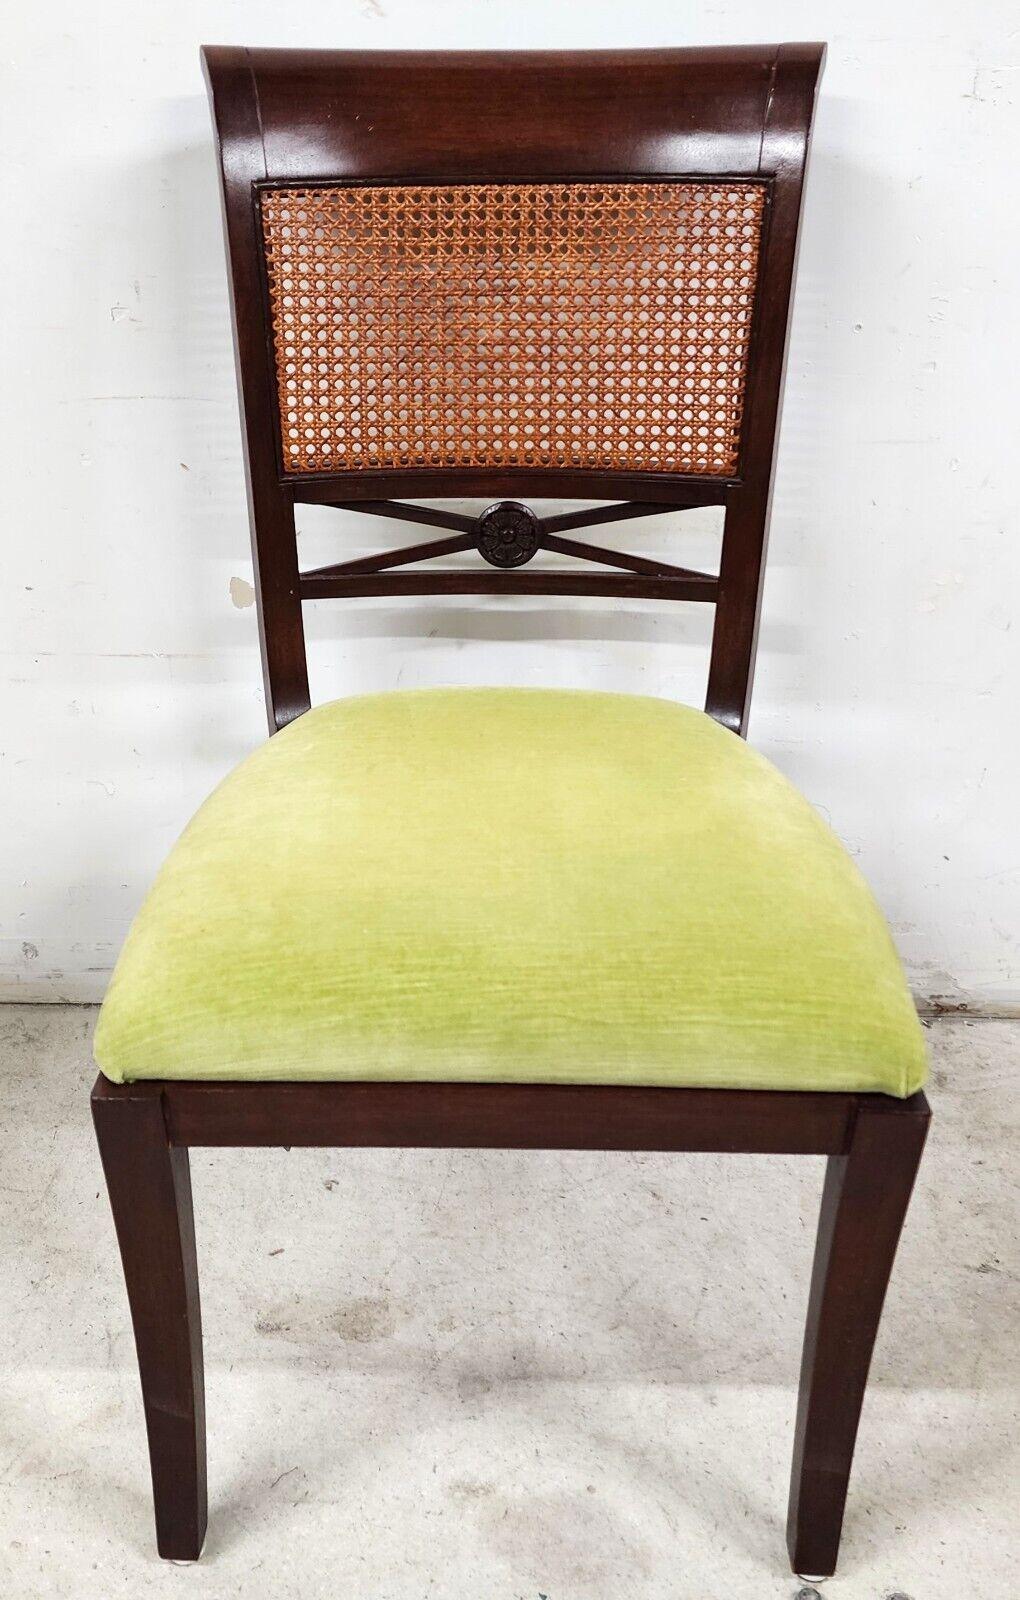 For FULL item description click on CONTINUE READING at the bottom of this page.

Offering one of our recent palm beach estate fine furniture acquisitions of a
Set of 6 Mahogany Cane Back Dining Chairs by Palecek
5 are shown in the listing but we